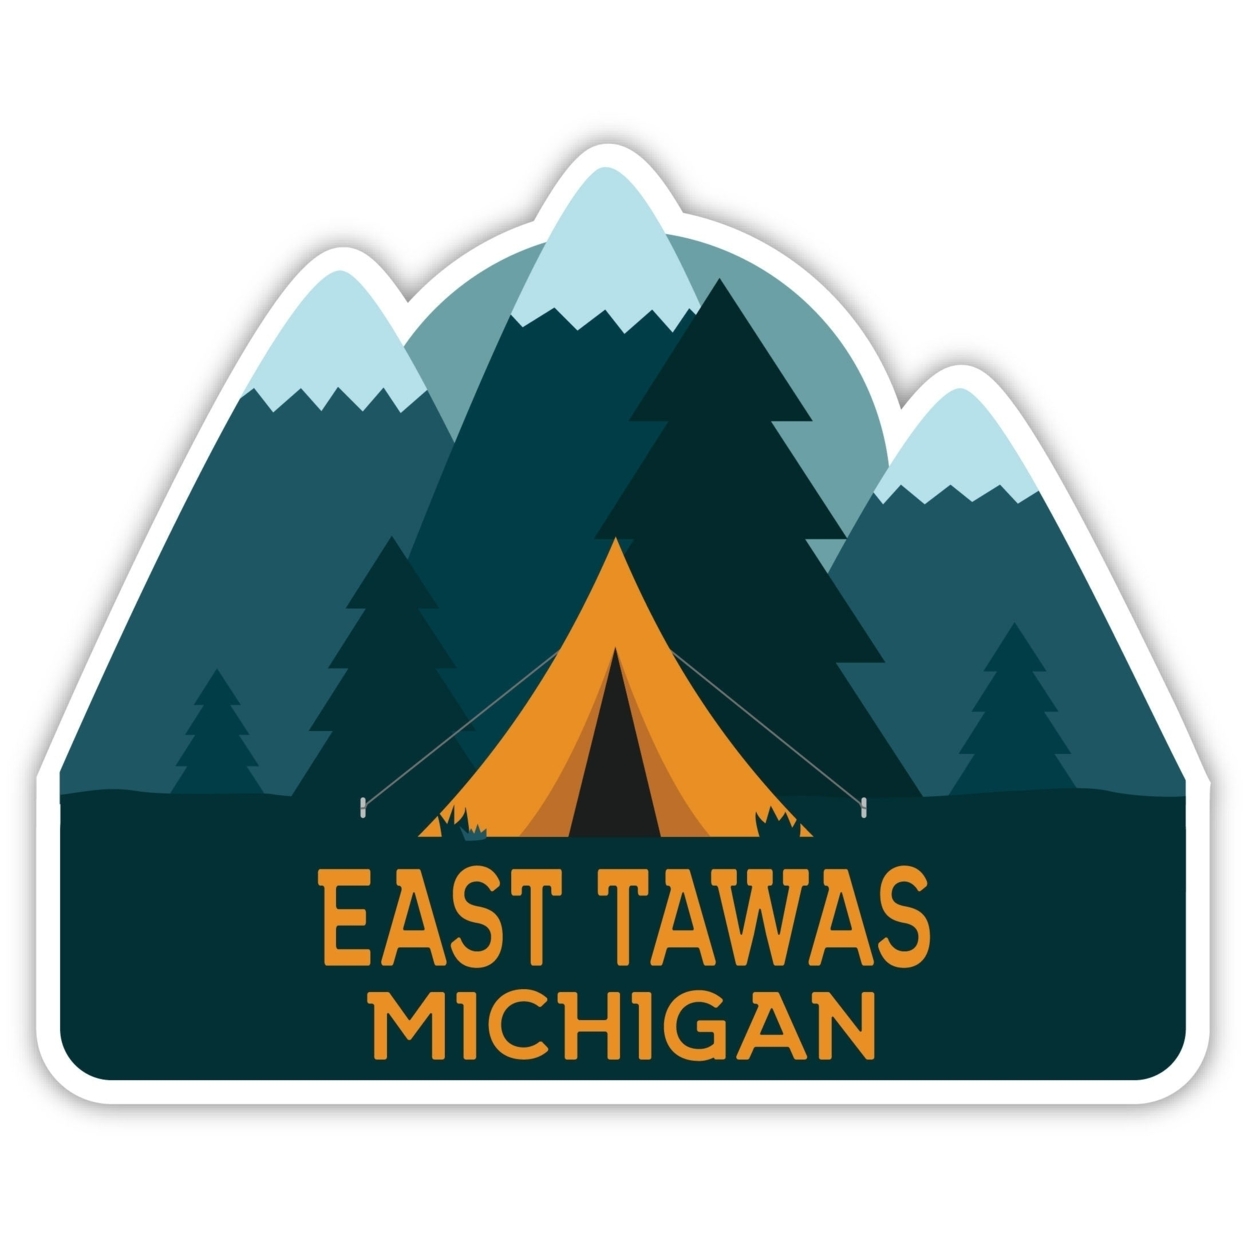 East Tawas Michigan Souvenir Decorative Stickers (Choose Theme And Size) - 4-Pack, 12-Inch, Adventures Awaits